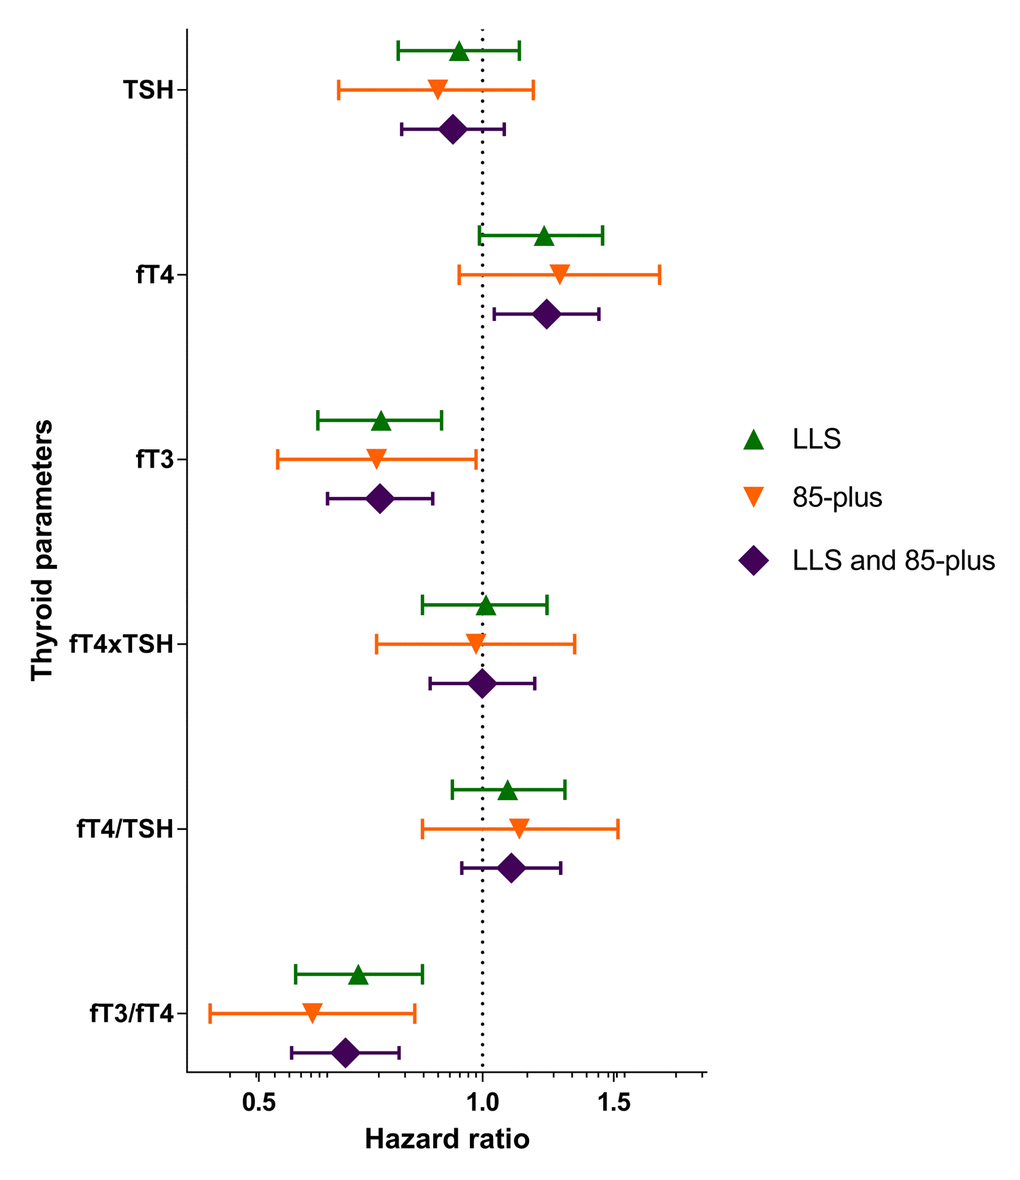 Mortality rate in the Leiden Longevity Study and the Leiden 85-plus Study. Hazard ratios and 95% confidence intervals for mortality of the highest sex-specific tertiles compared to the lowest sex-specific tertiles are shown for the Leiden Longevity Study participants, the Leiden 85-plus Study participants and the pooled Hazard ratios. LLS = participants of the Leiden Longevity Study, 85-plus = participants of the Leiden 85-plus Study, LLS and 85-plus = combined estimates of the Leiden Longevity Study and the Leiden 85-plus Study.